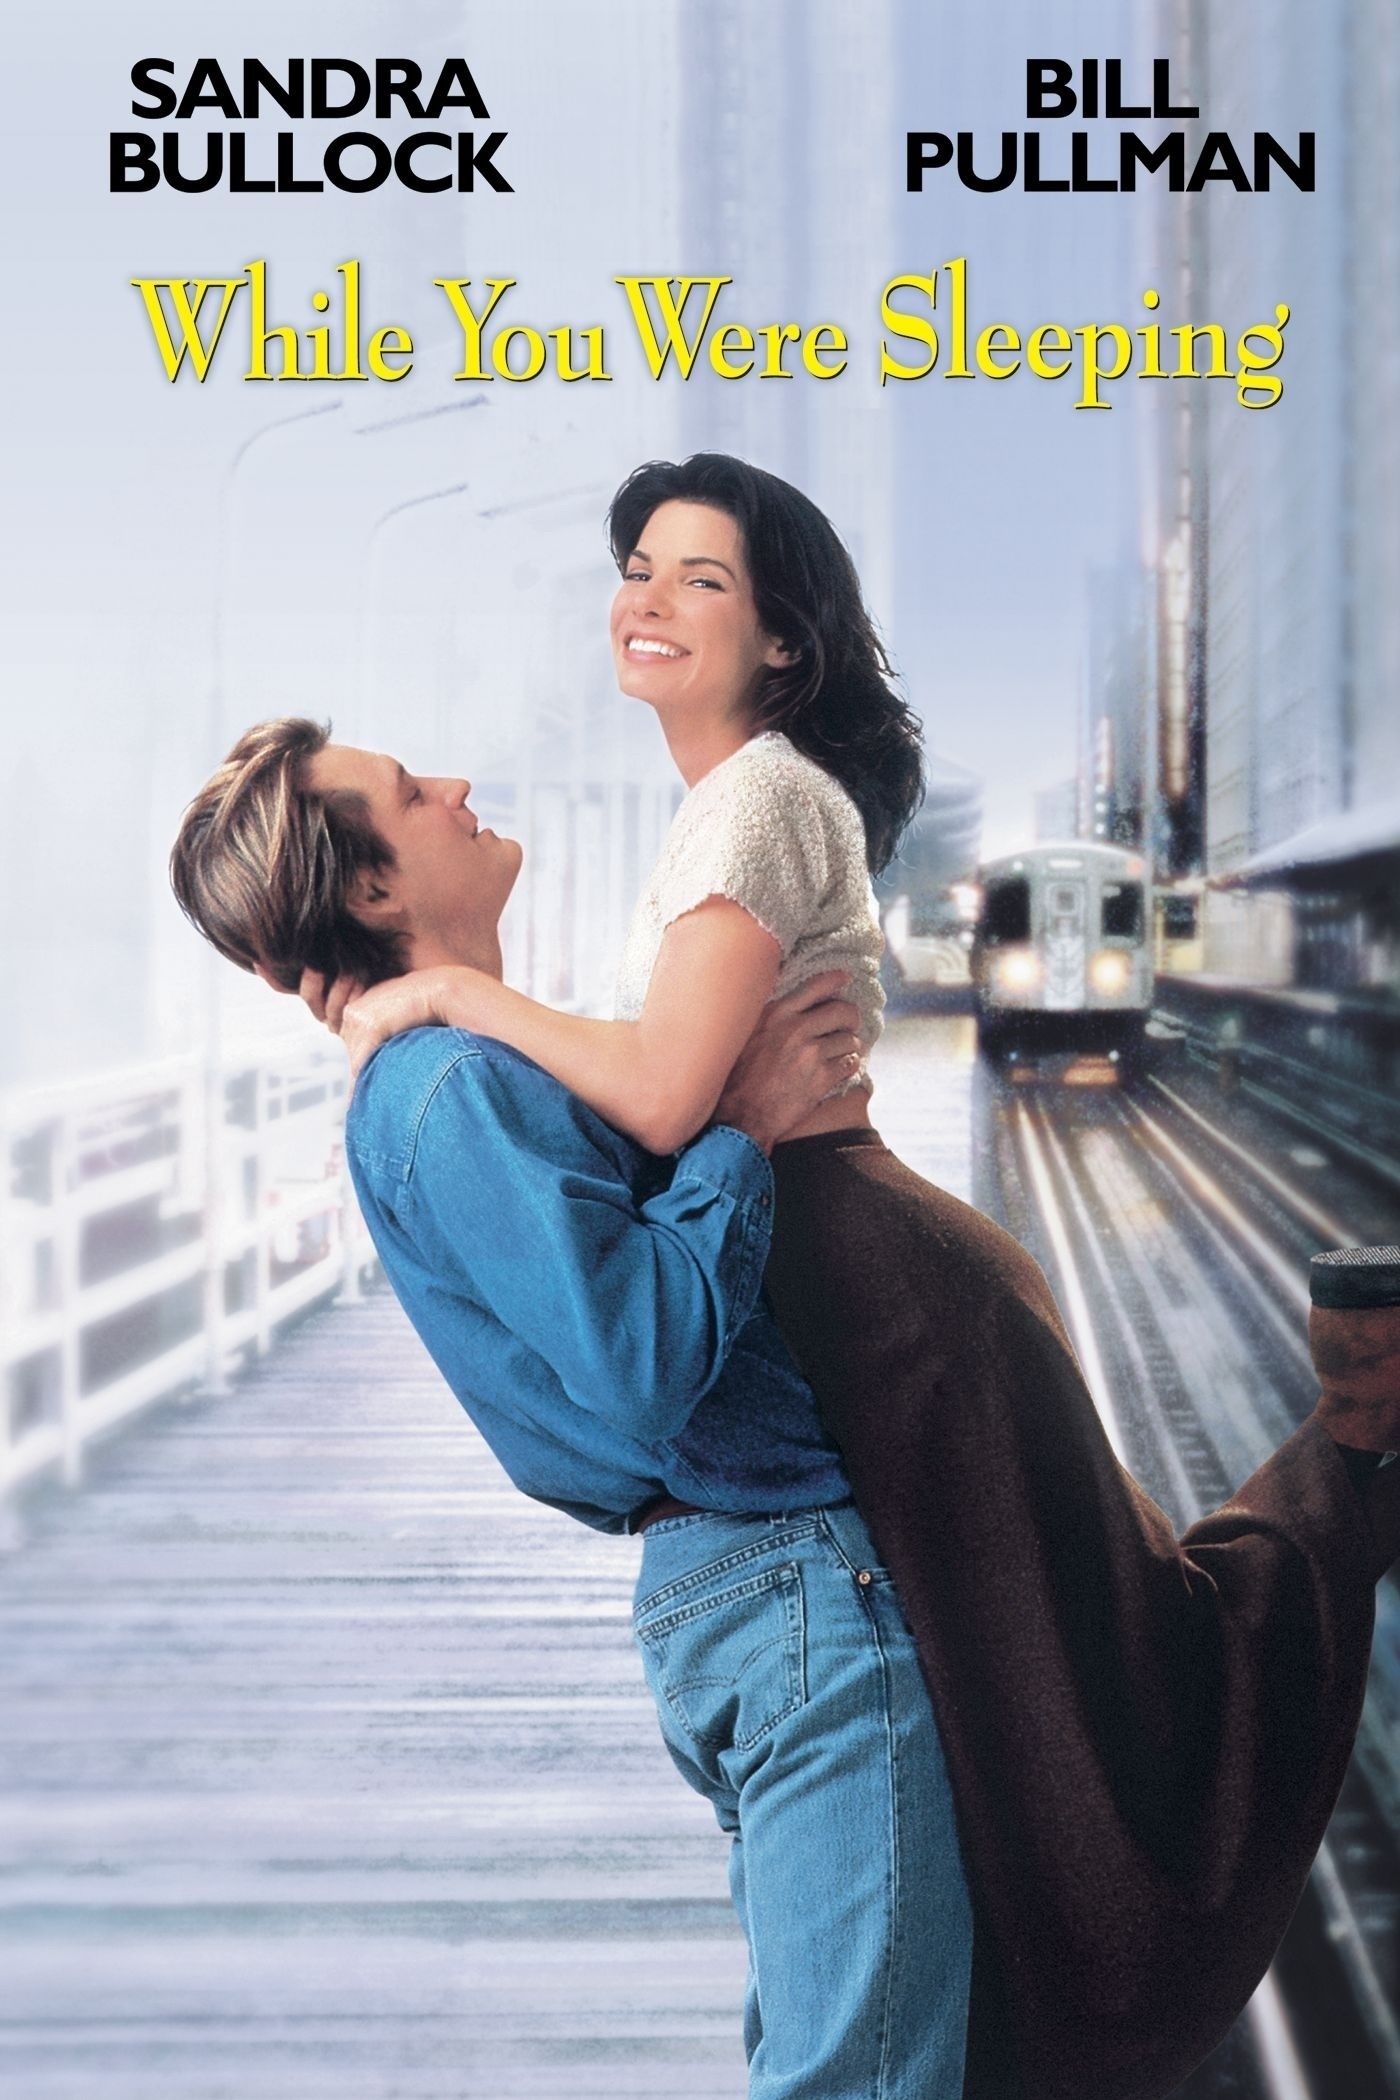 Movie poster for 'While You Were Sleeping' (1995).